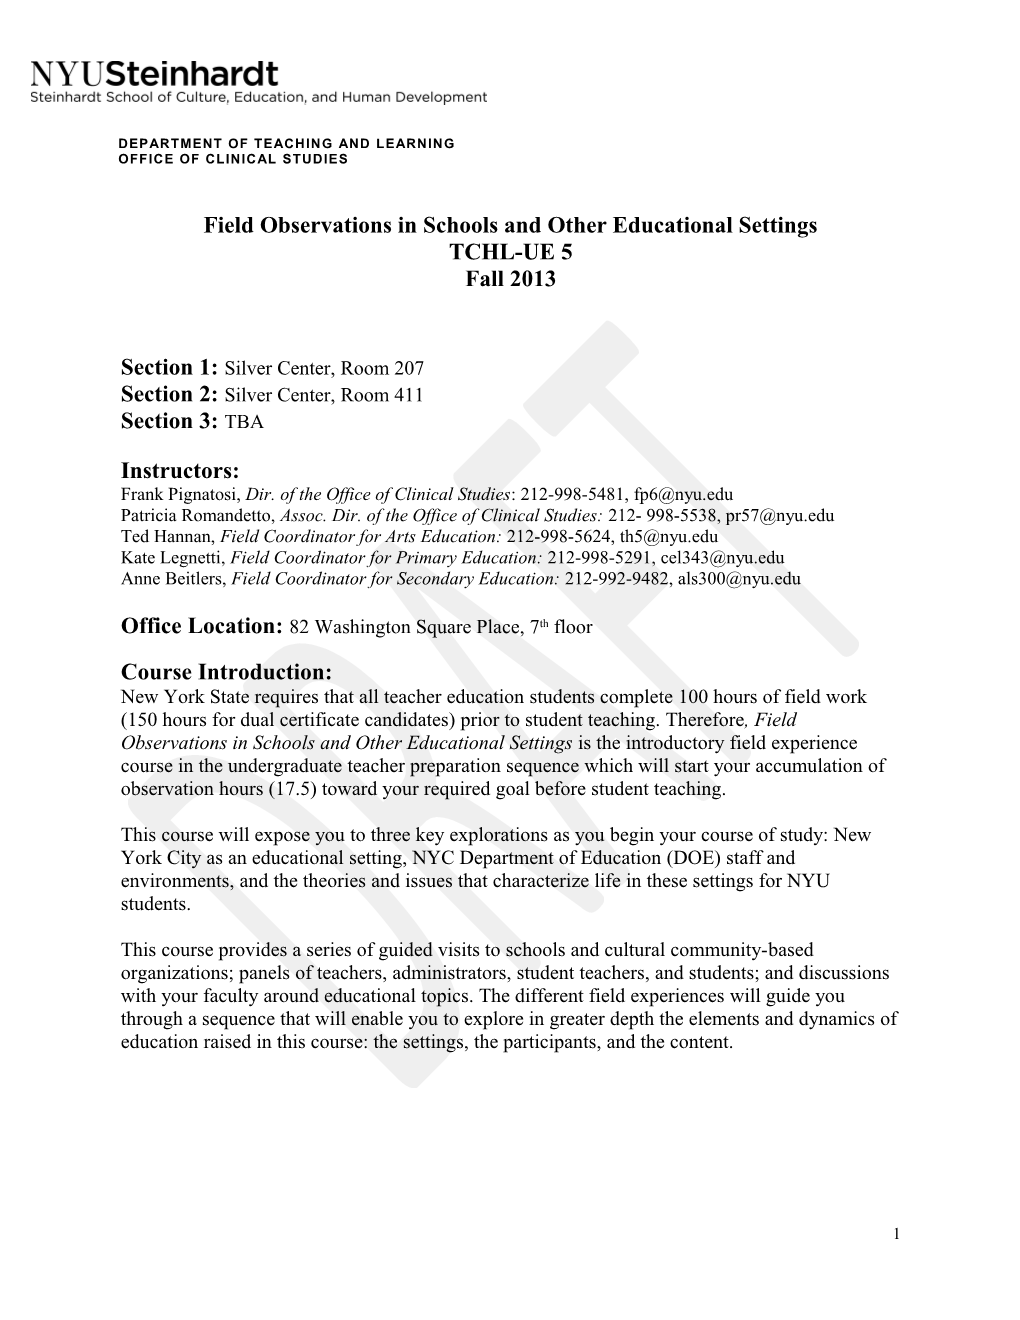 Field Observations in Schools and Other Educational Settings